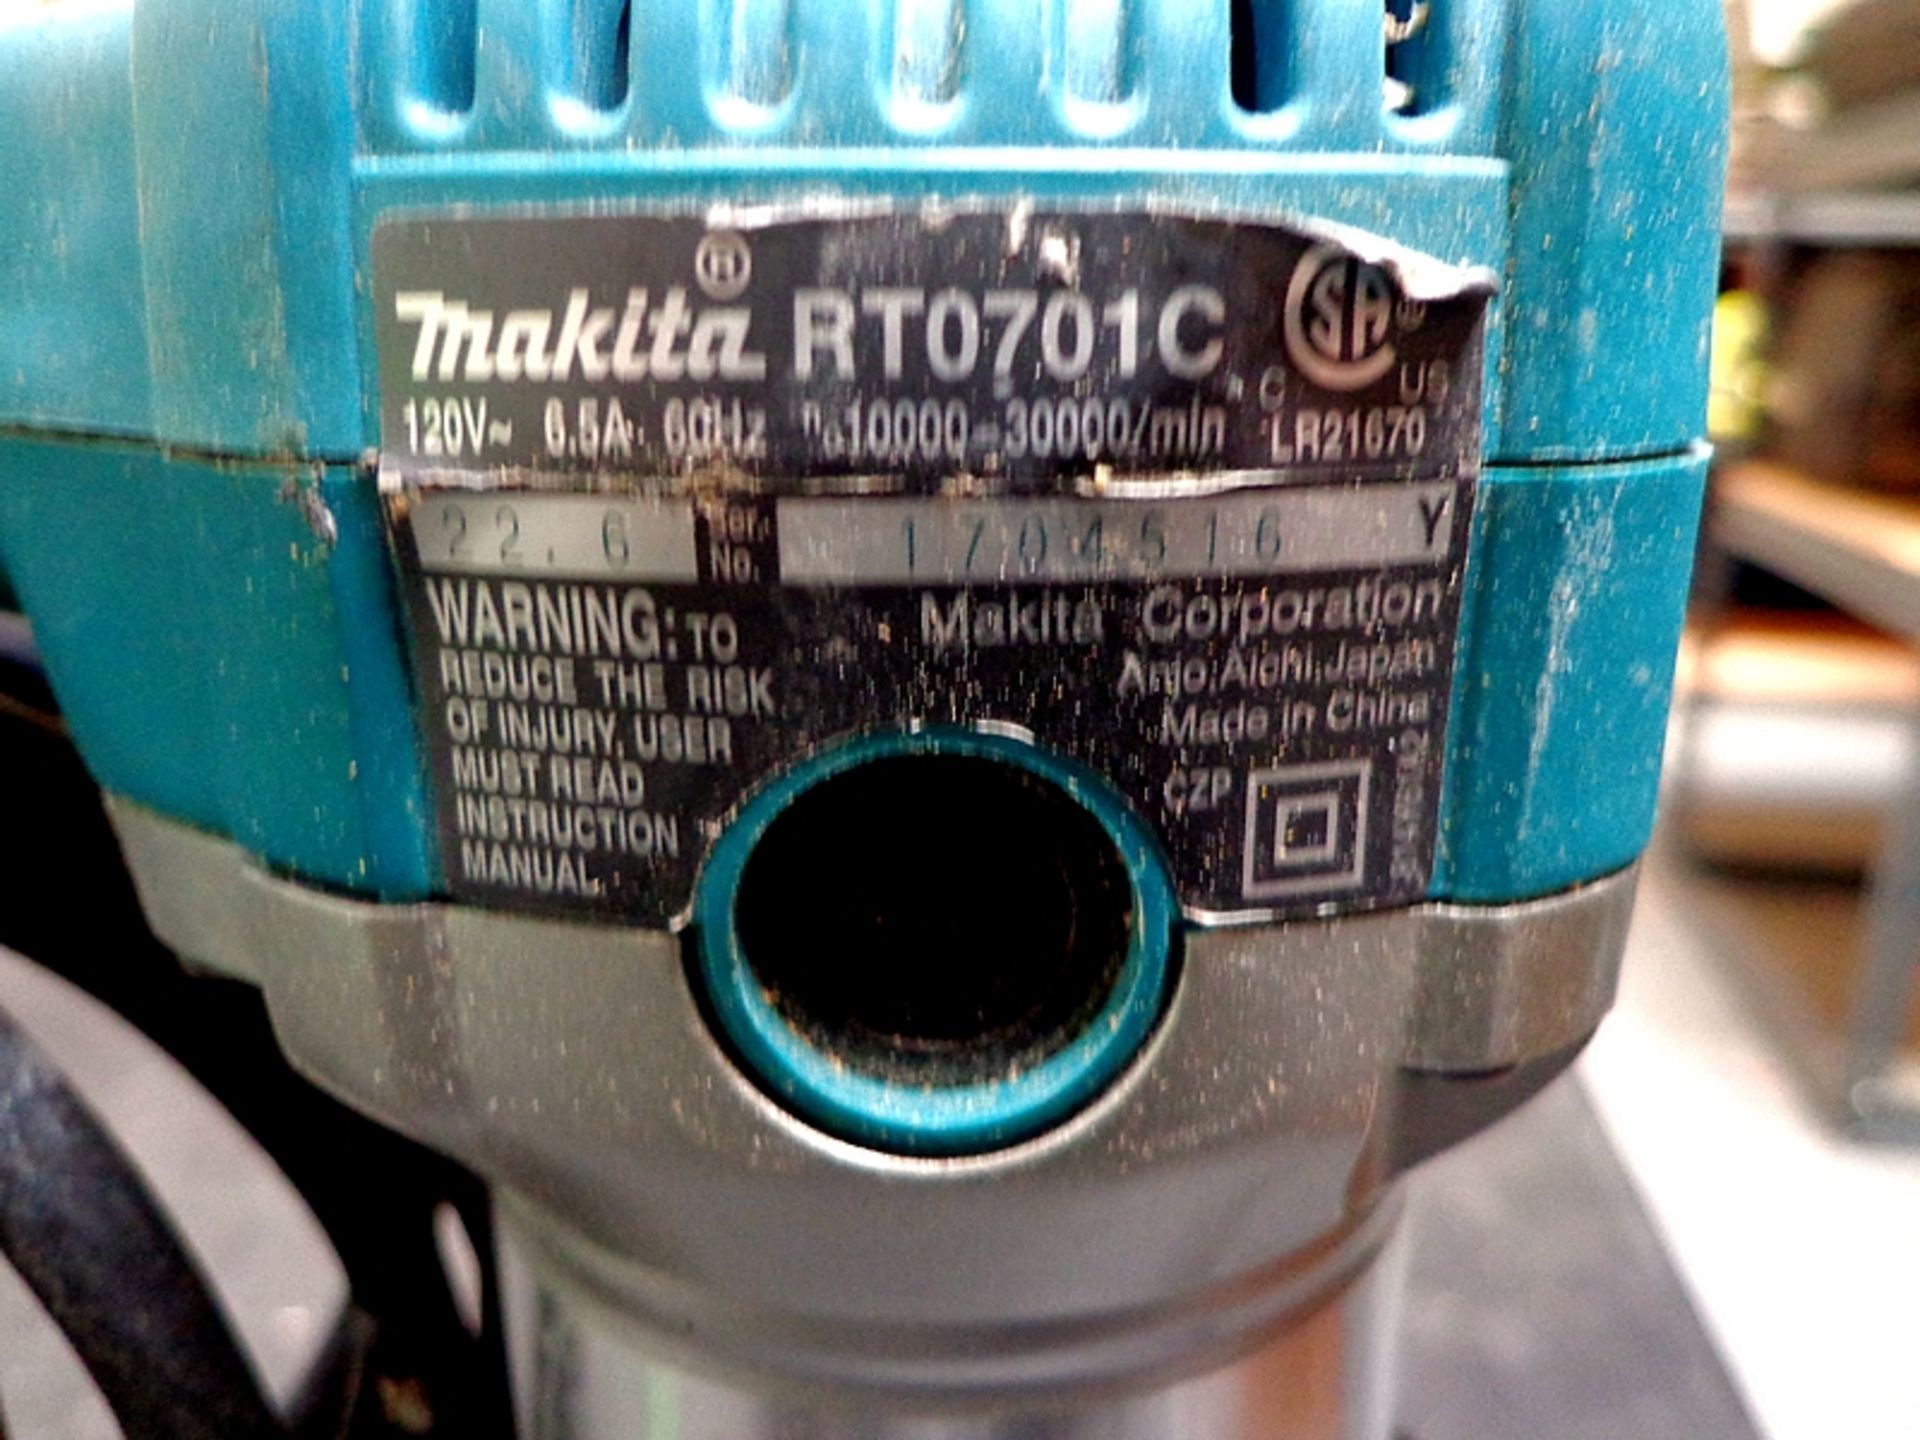 LOT (2) MAKITA RT0701C 1-1 1/4" HP COMPACT ROUTER - Image 2 of 4